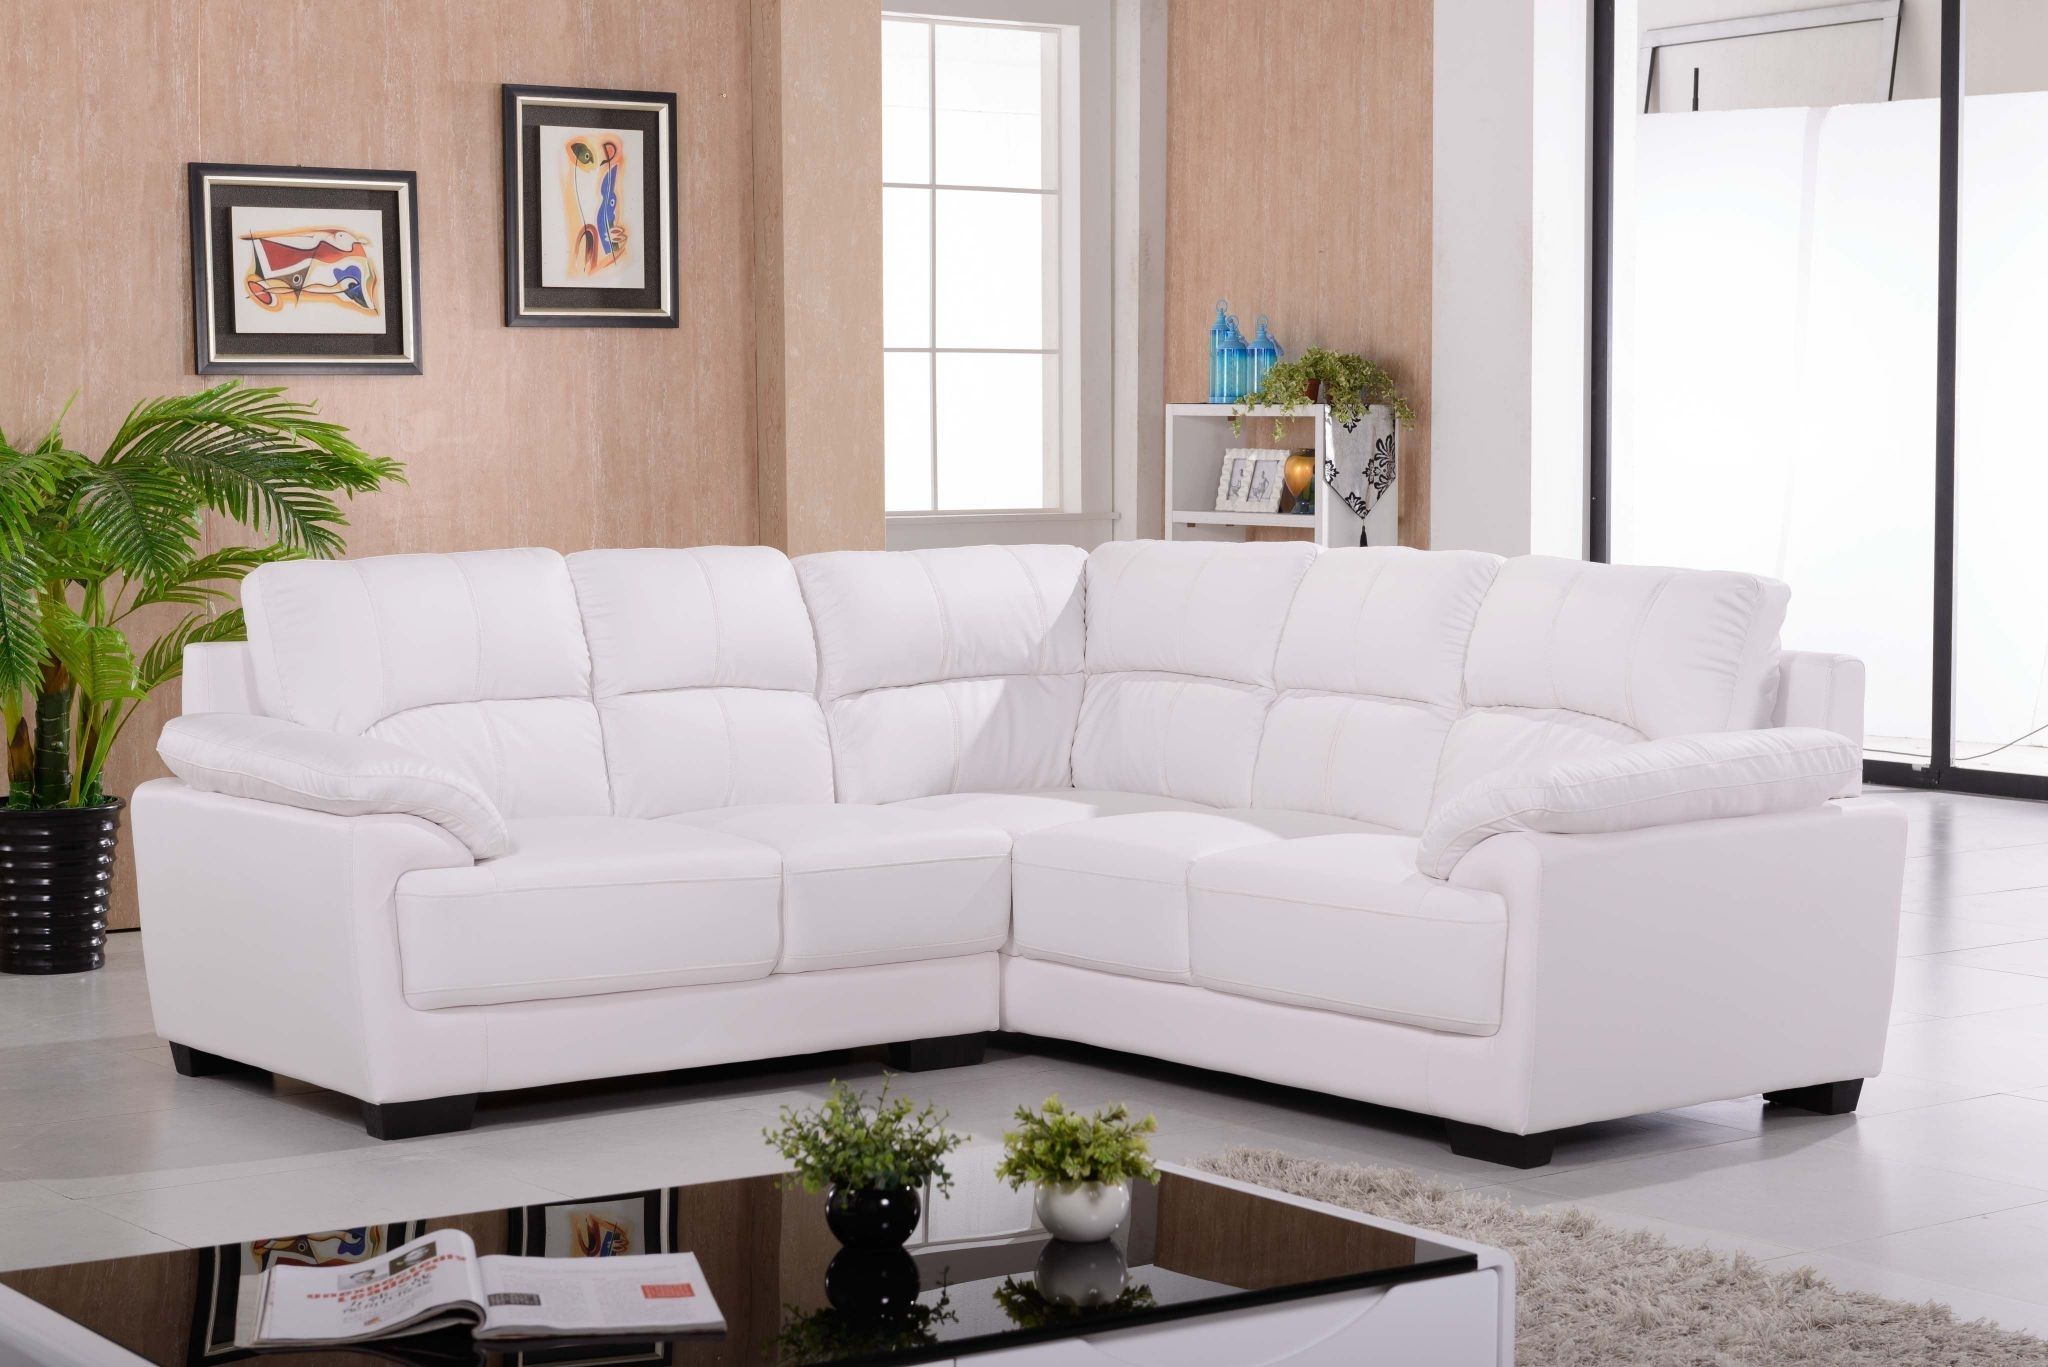 Astonishing Furniture White Leather Sofa Bed Sectional Modern Living Within White Leather Corner Sofas 